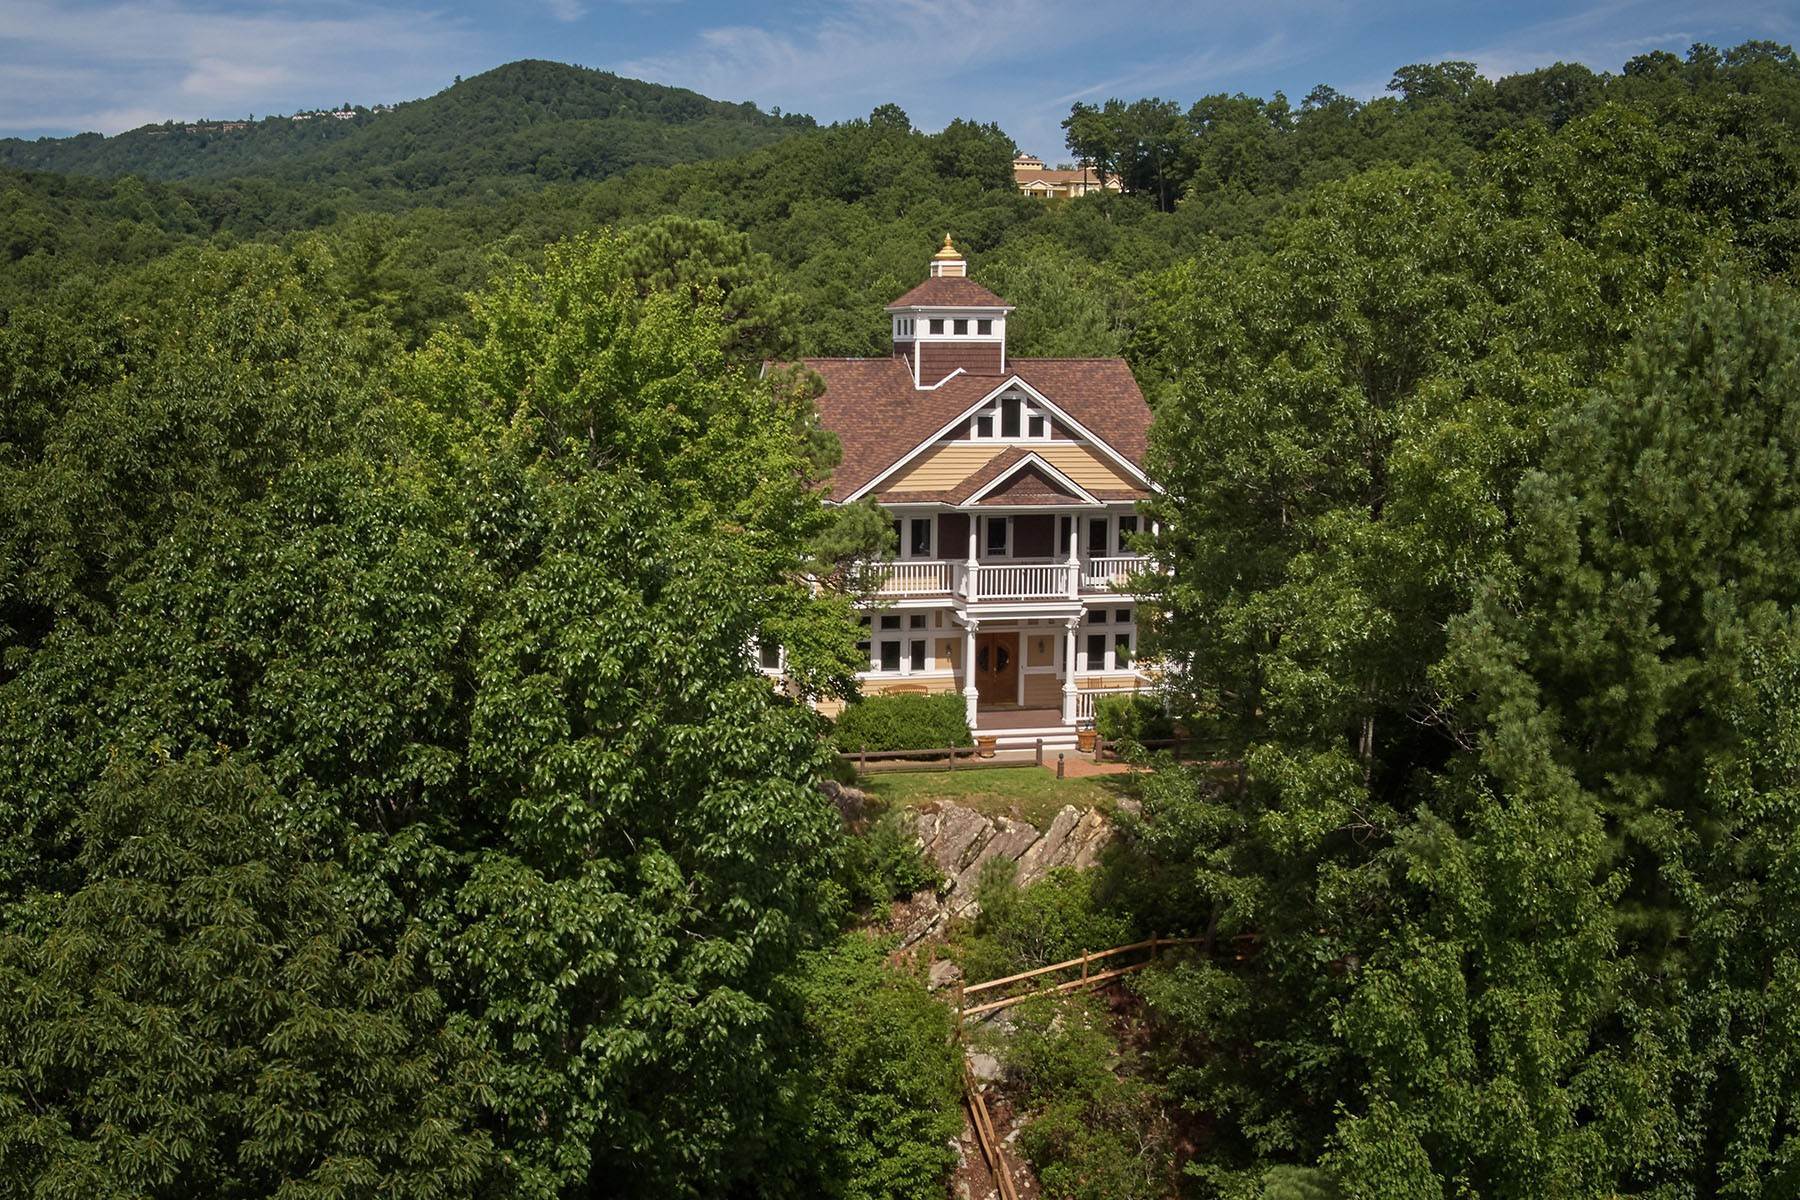 Single Family Homes for Sale at HEAVENLY MOUNTAIN - BOONE 179 The Courtyard Boone, North Carolina 28607 United States